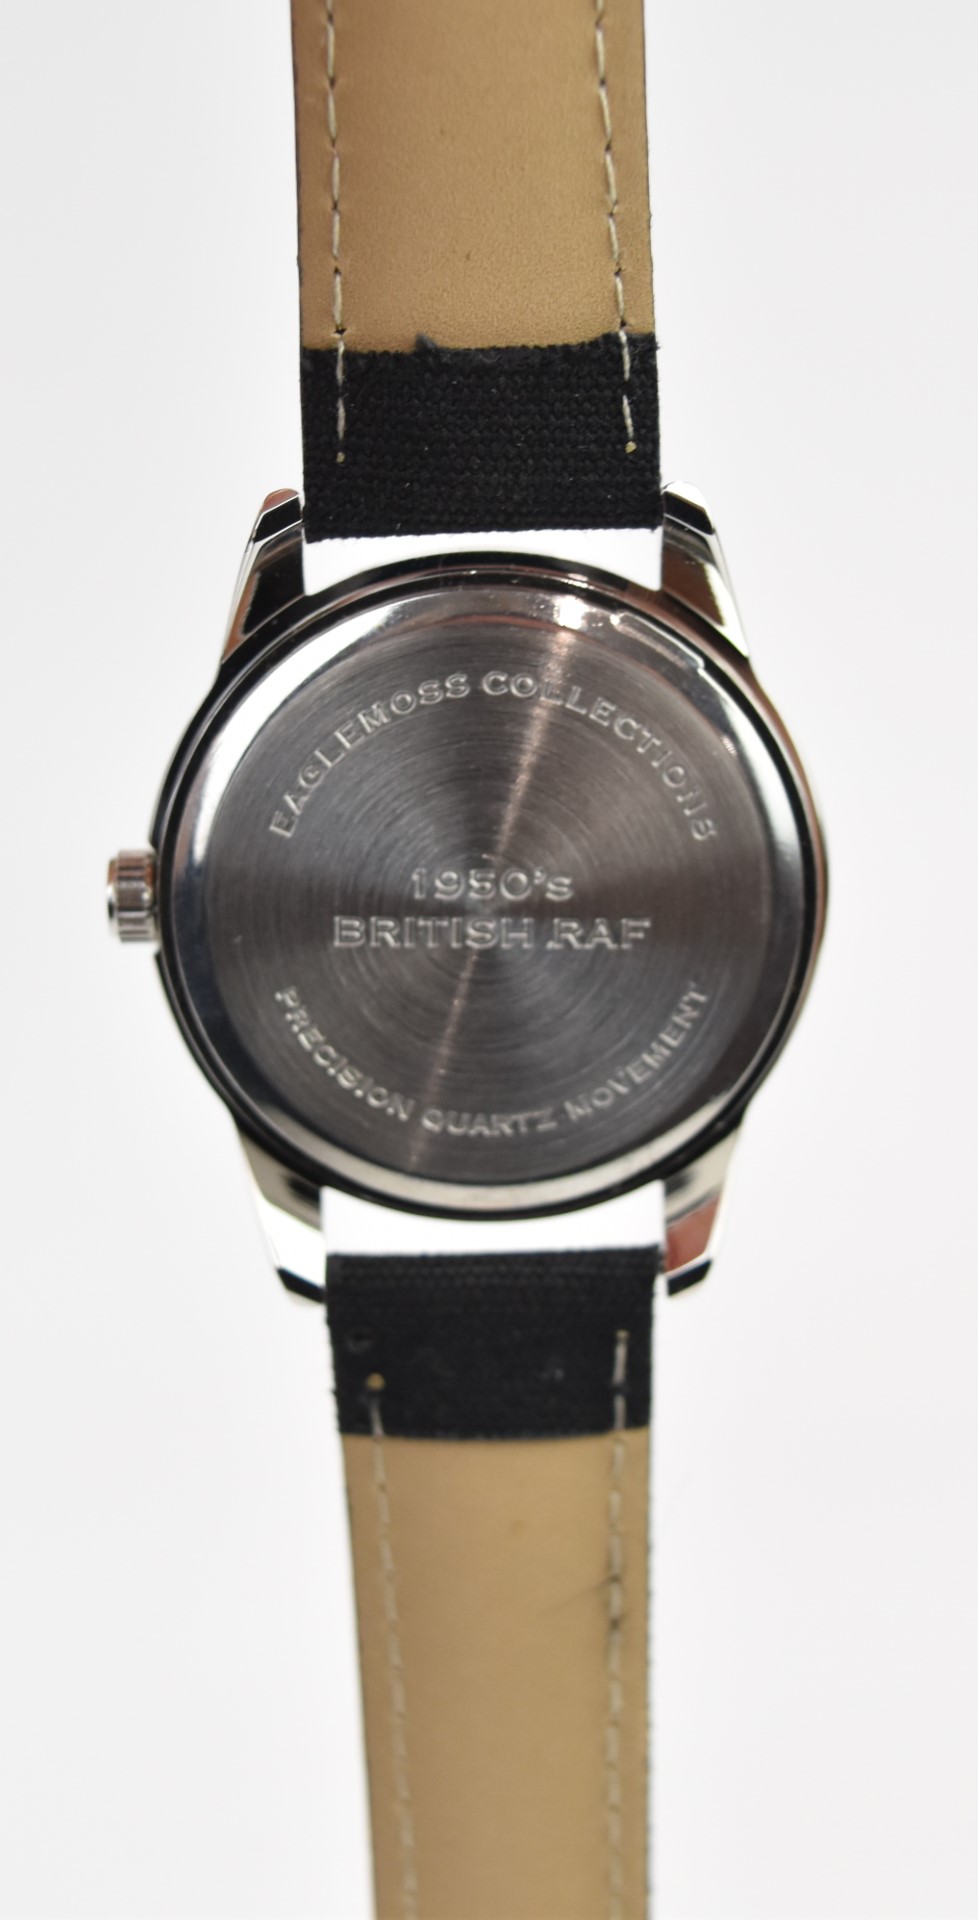 British RAF military style wristwatch with luminous hands and hour markers, white Arabic numerals, - Image 3 of 3